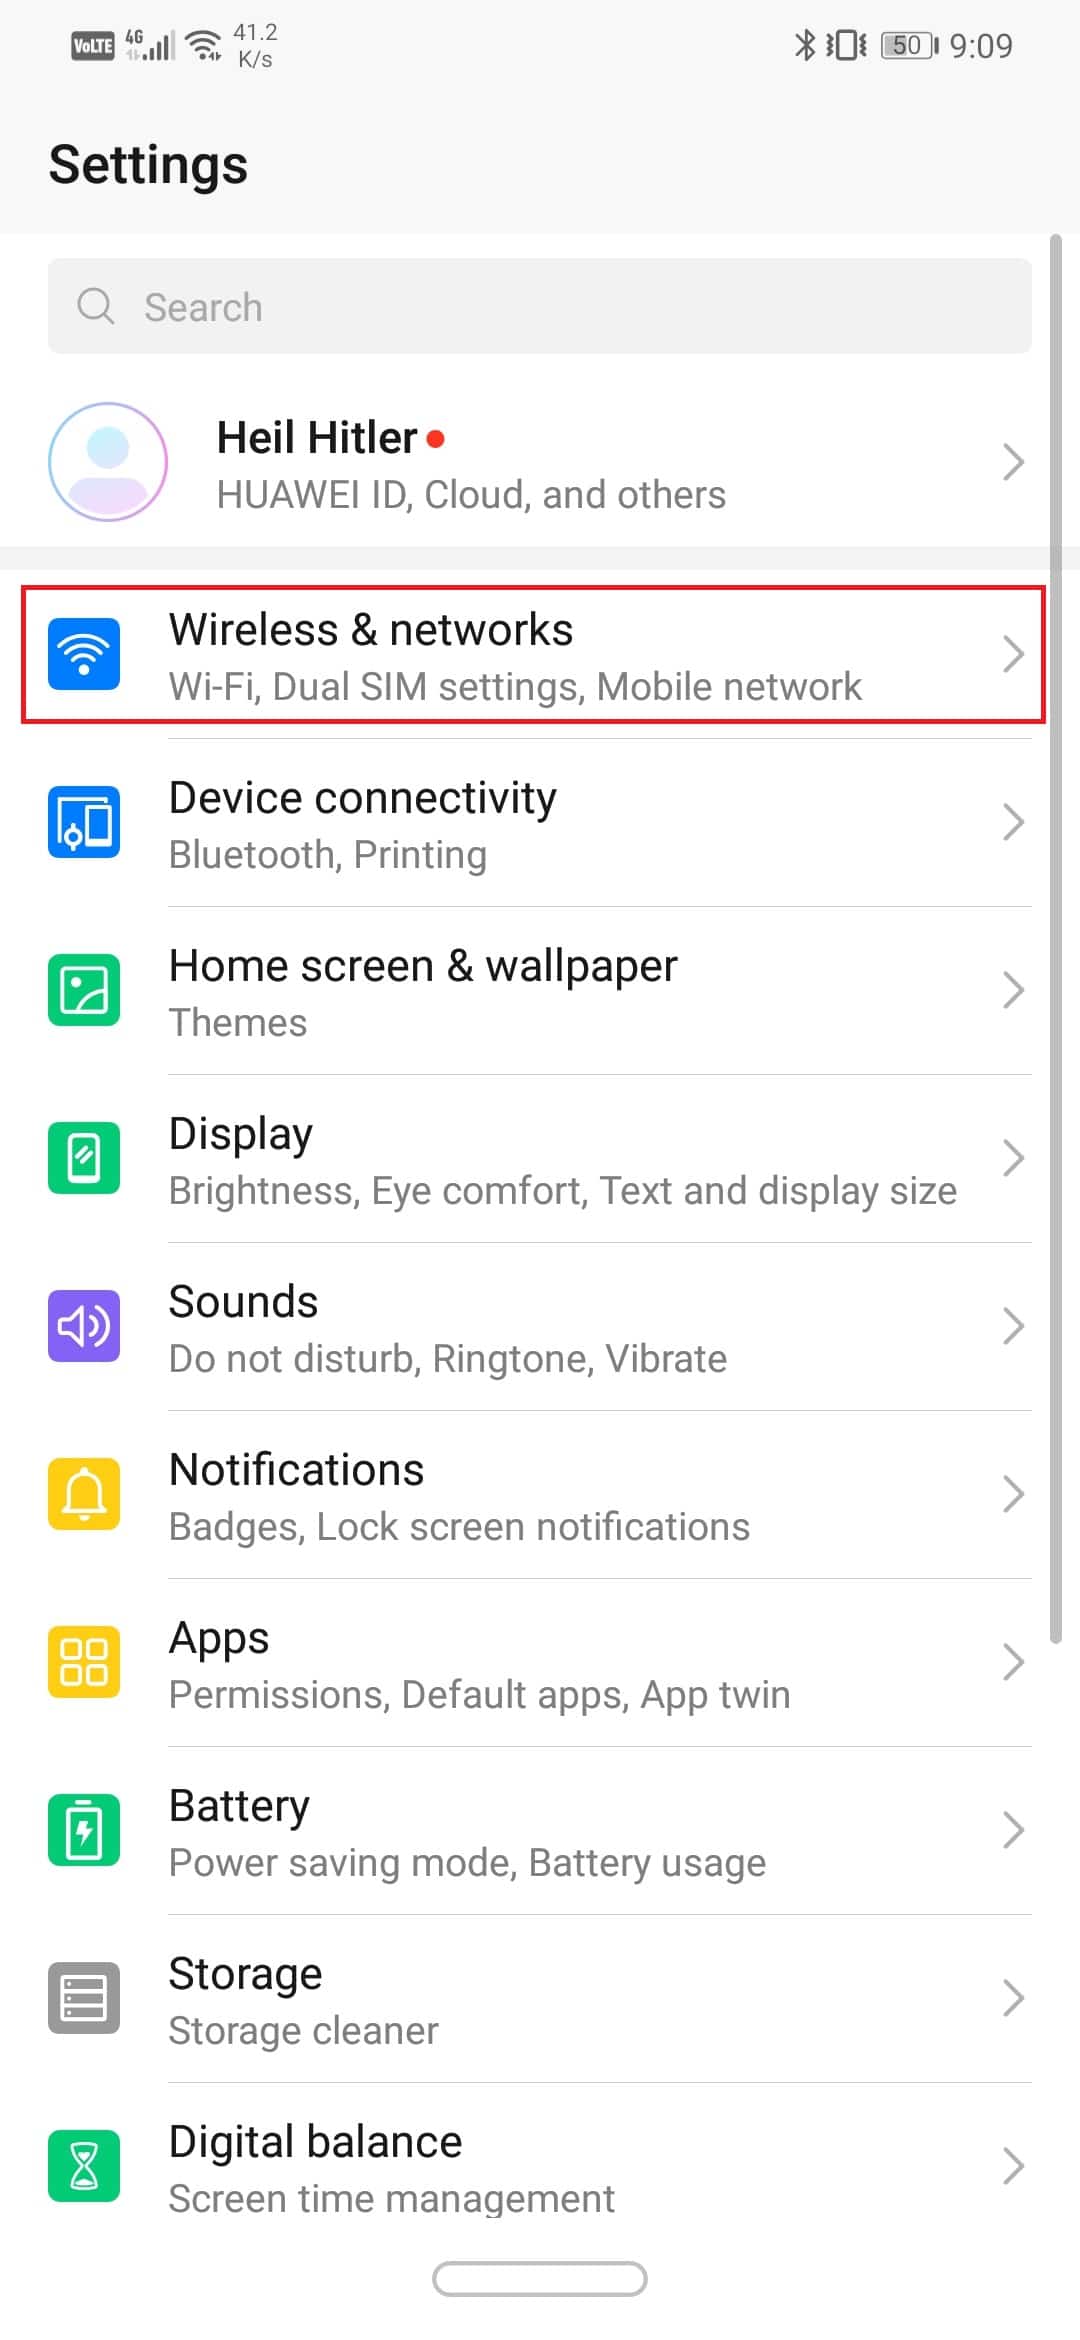 tap on the Wireless and networks option and select Wi-Fi. | boost Wi-Fi signal on Android